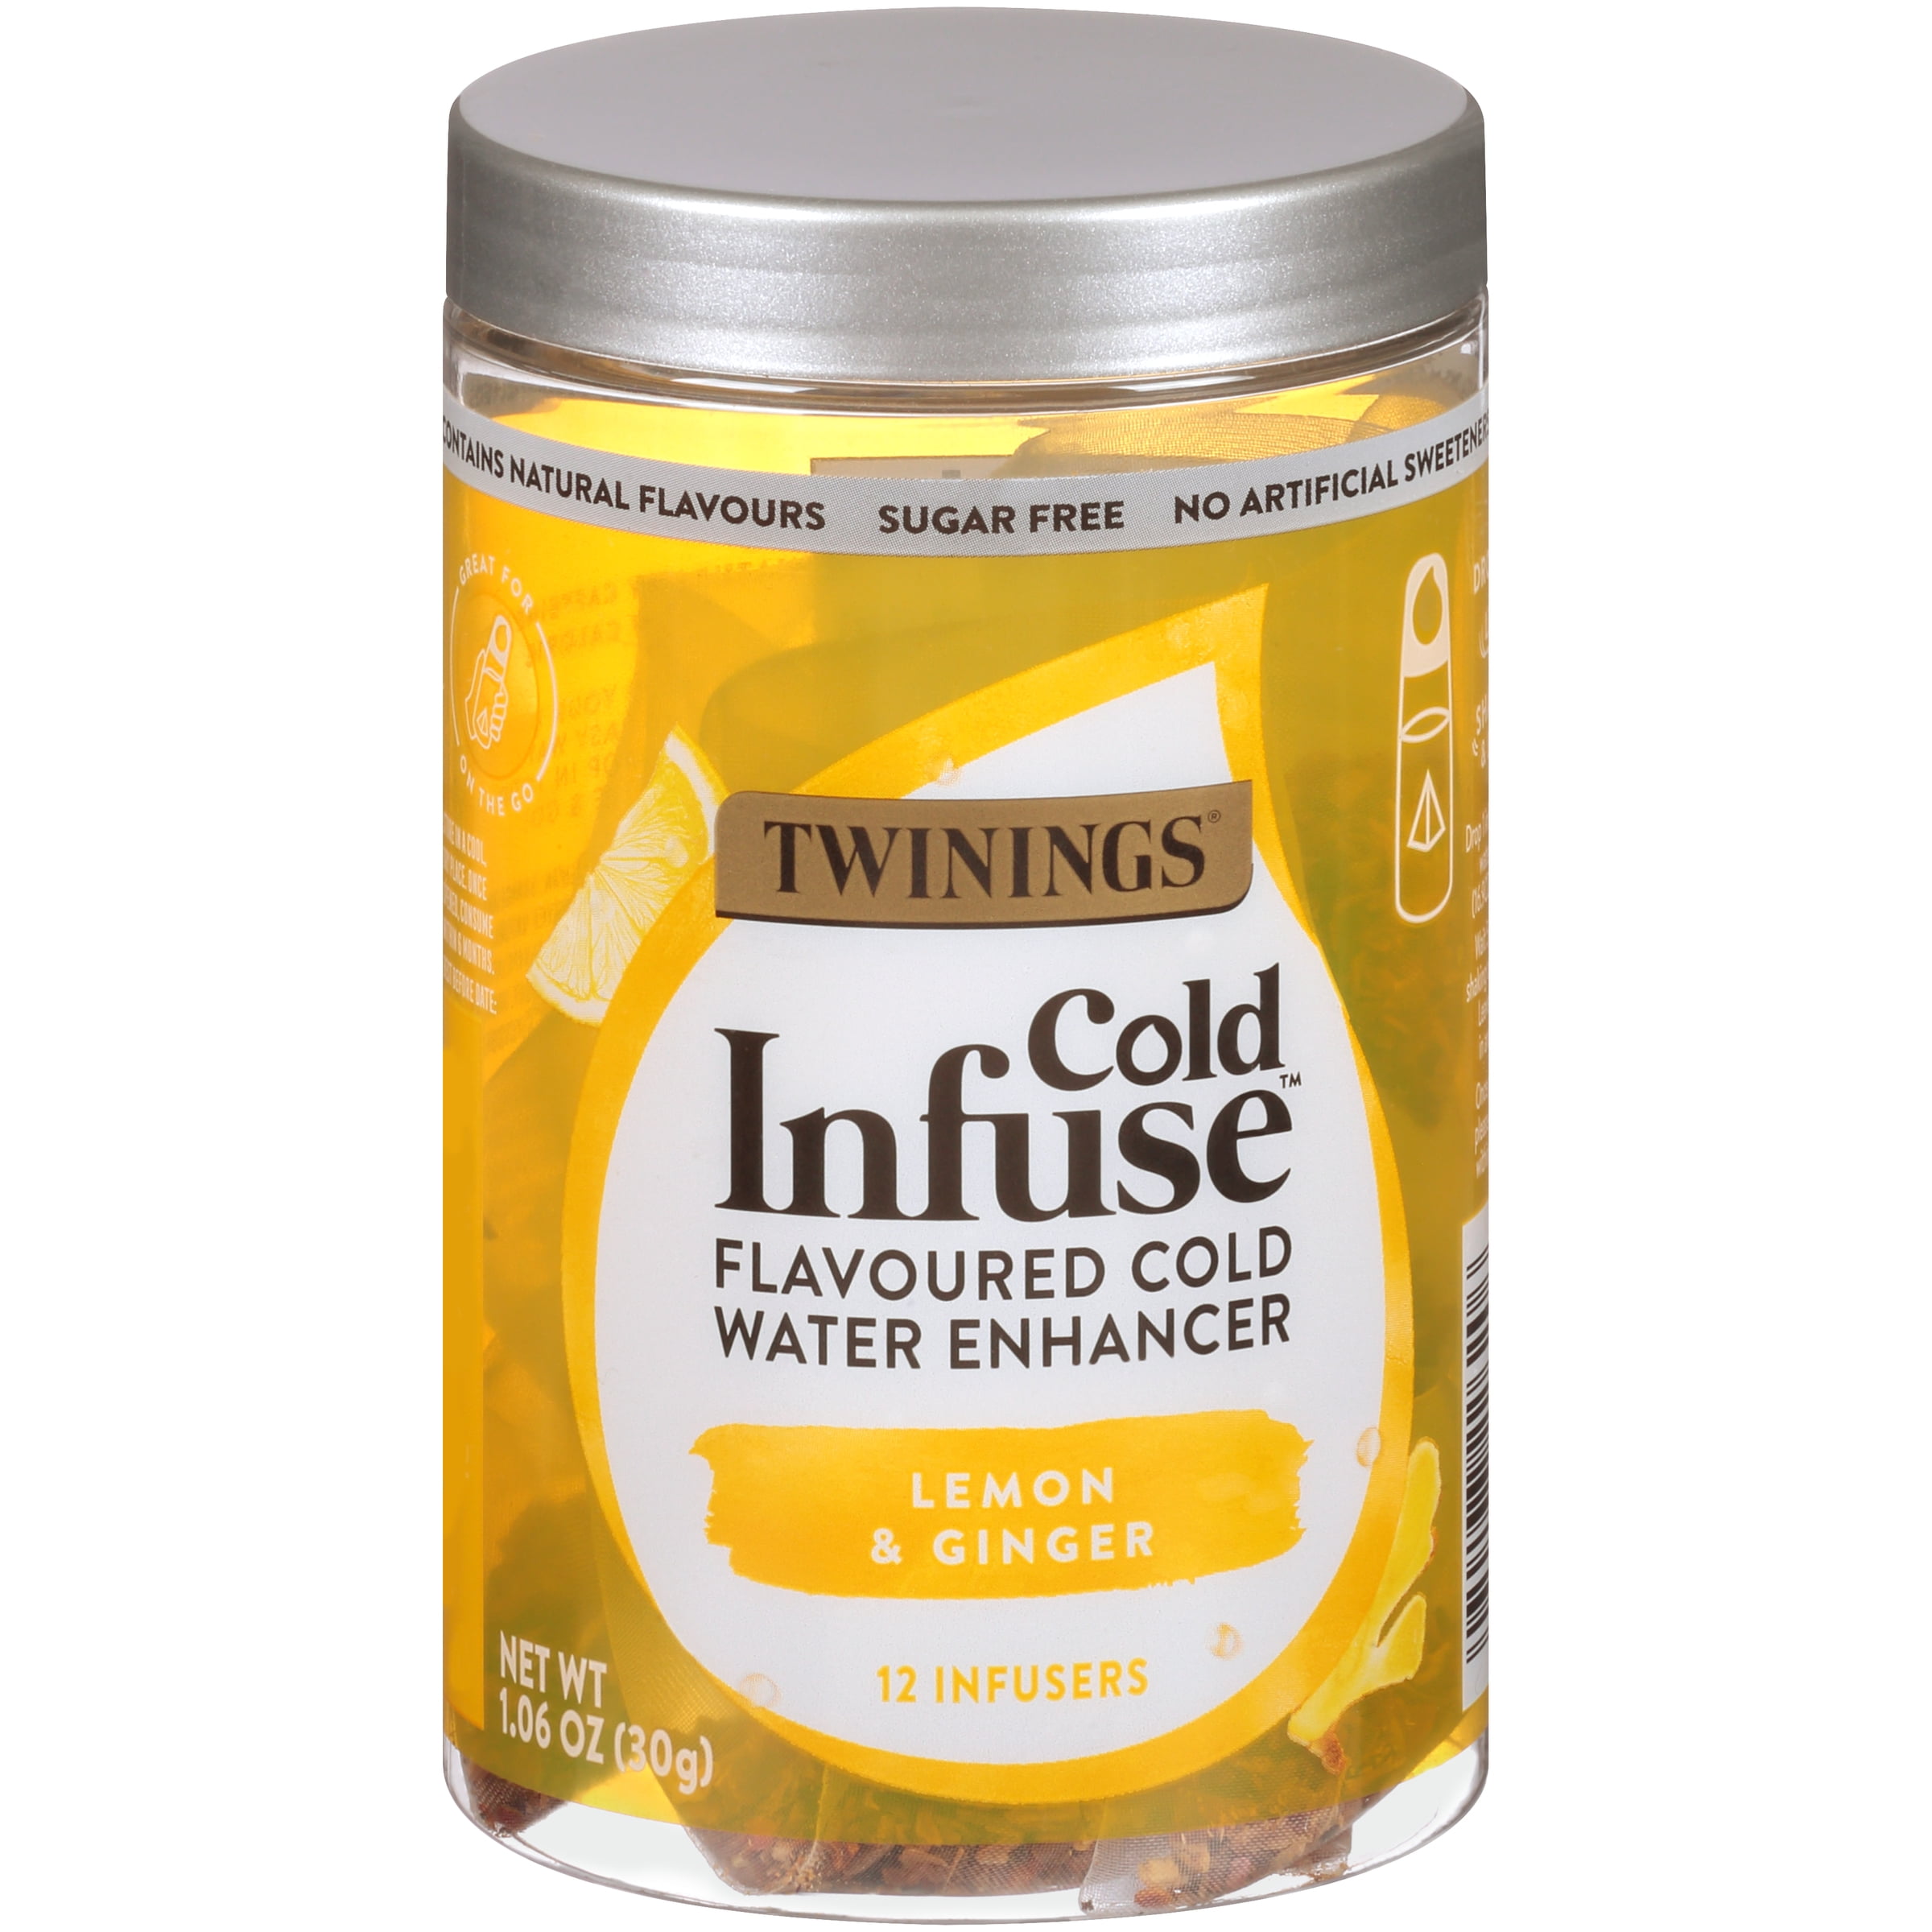 Twinings Cold Infuse Lemon & Ginger Flavoured Cold Water Enhancer, 12 Ct